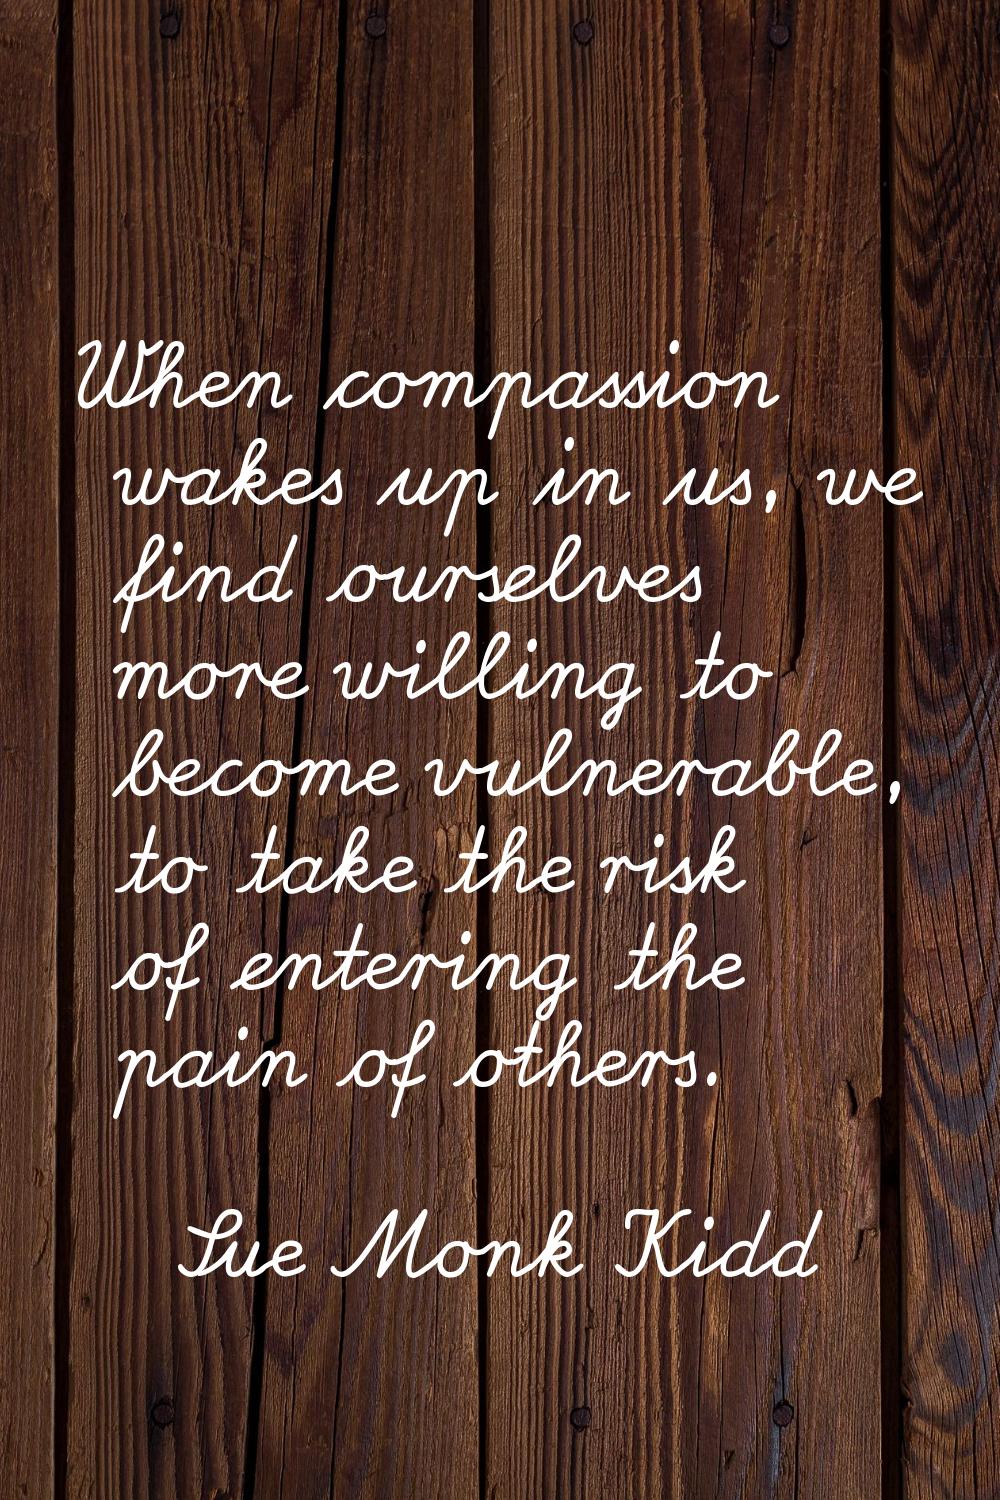 When compassion wakes up in us, we find ourselves more willing to become vulnerable, to take the ri